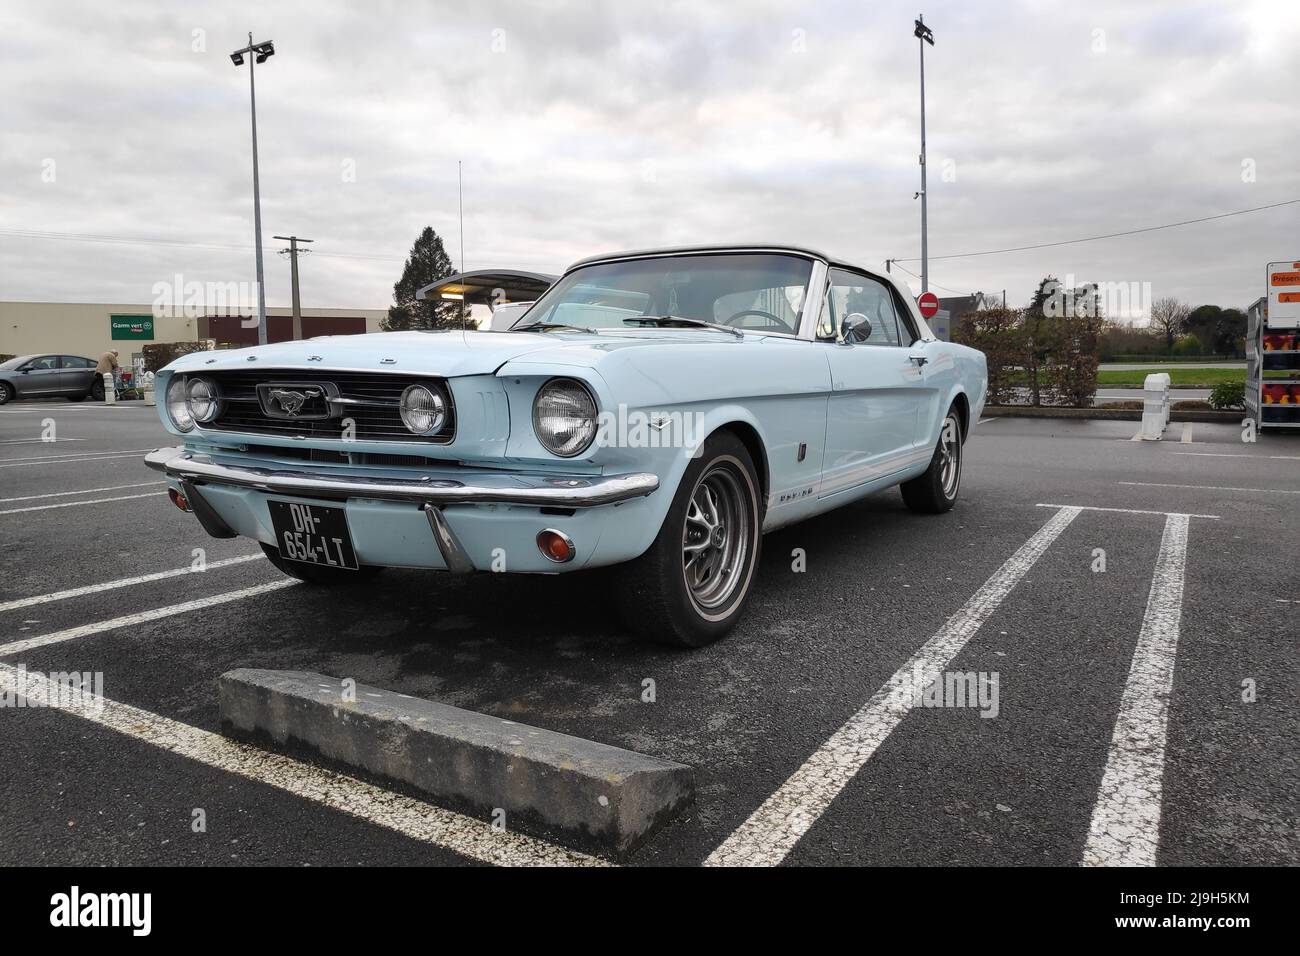 Pleyber-Christ, France - January 05 2022: 1966 Ford Mustang GT Convertible 289 in a parked lot. Stock Photo